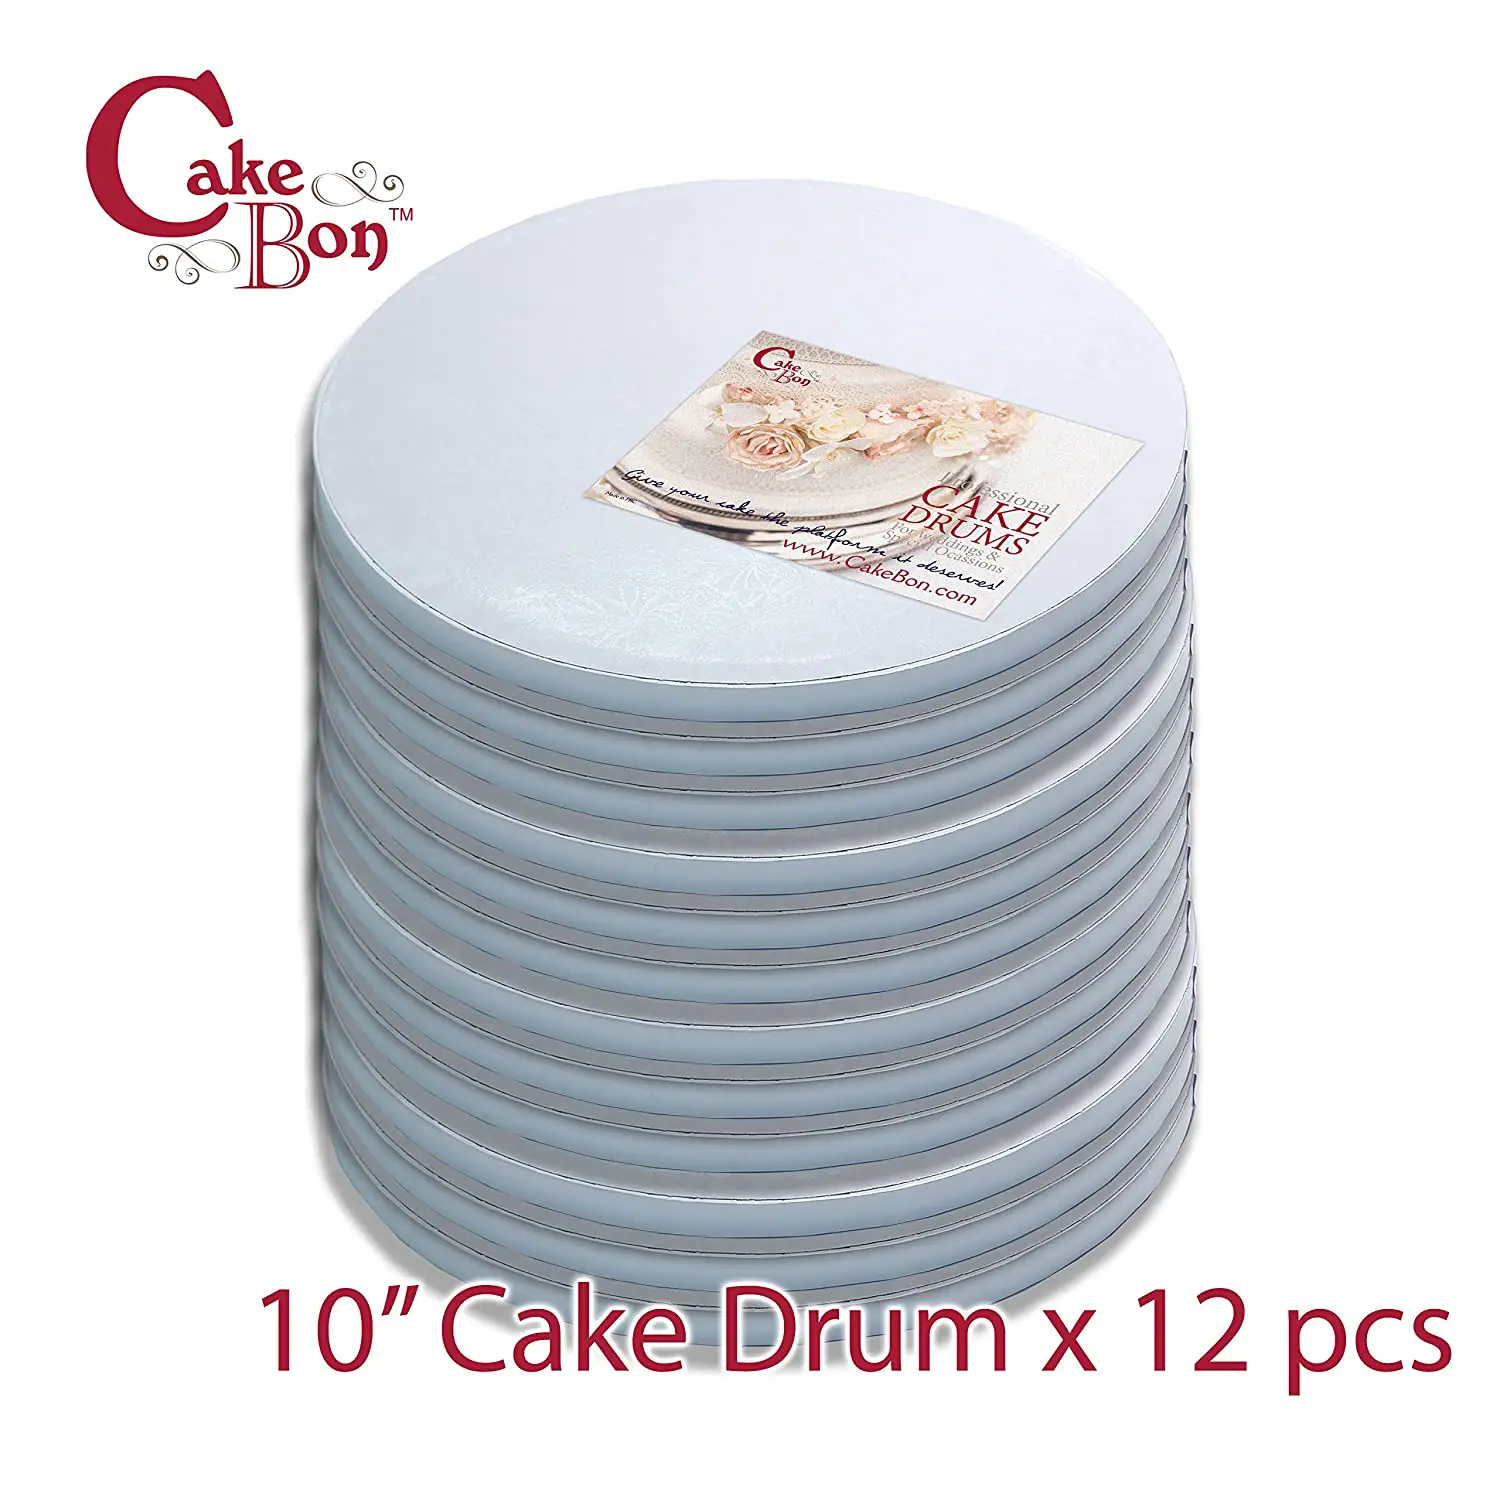 Cake drums - Cake Drums Round 10 Inches - (White, 12-Pack) - Sturdy 1/2 Inch Thick - Professional Smooth Straight Edges - Free Satin Cake Ribbon 12-pack Round - WHITE (Smooth Edge) - Image 1